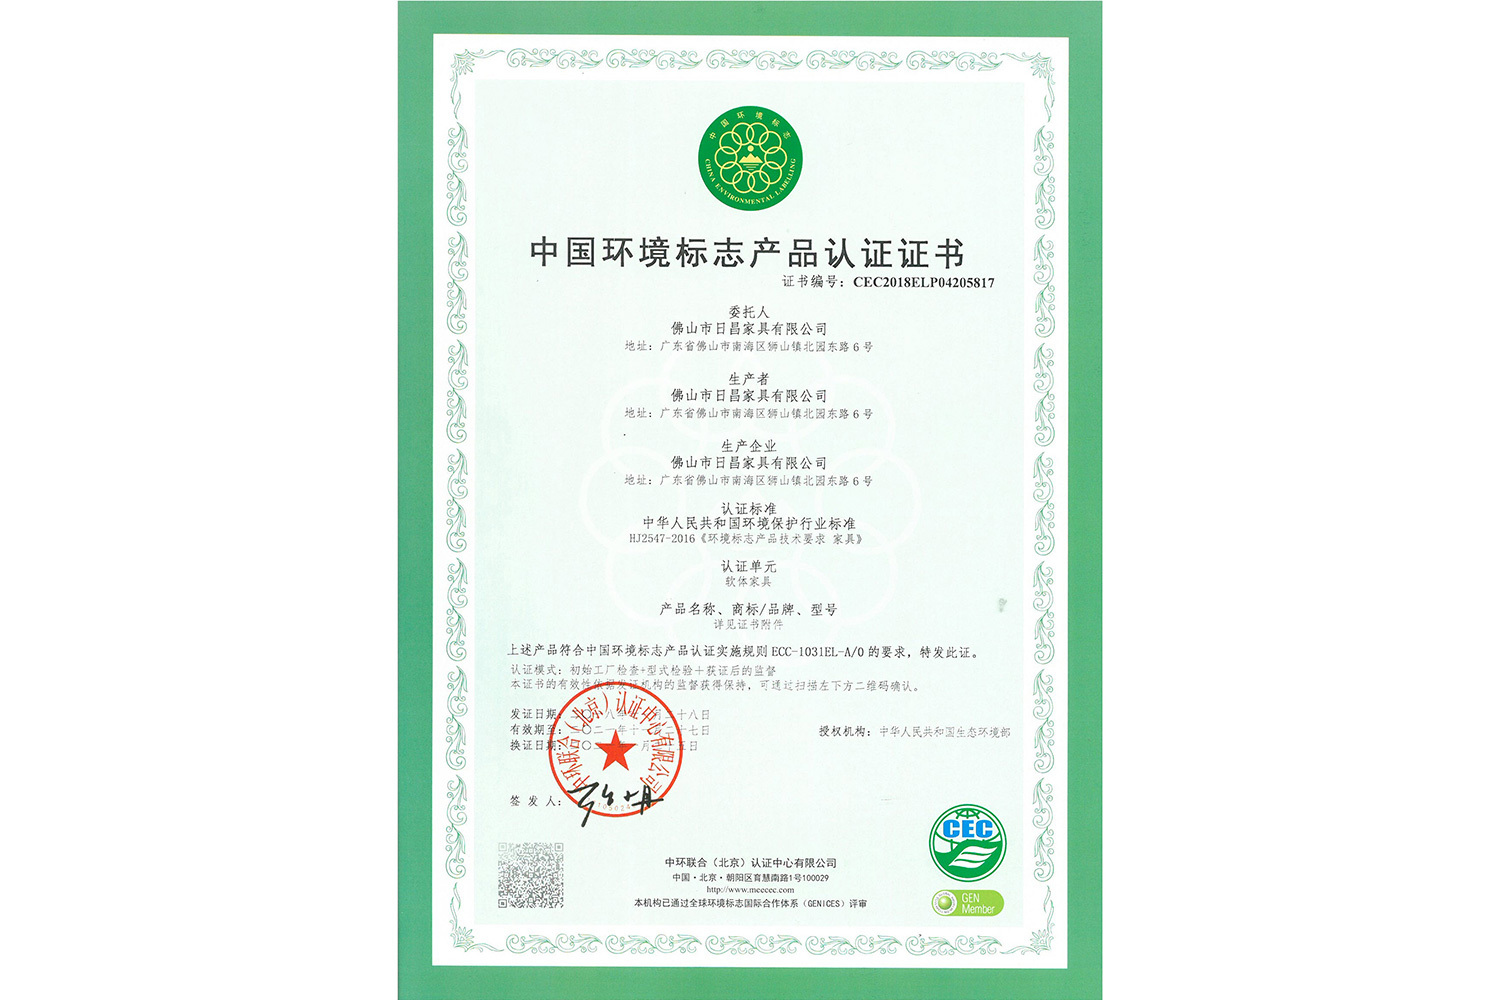 China environmental labeling product certification